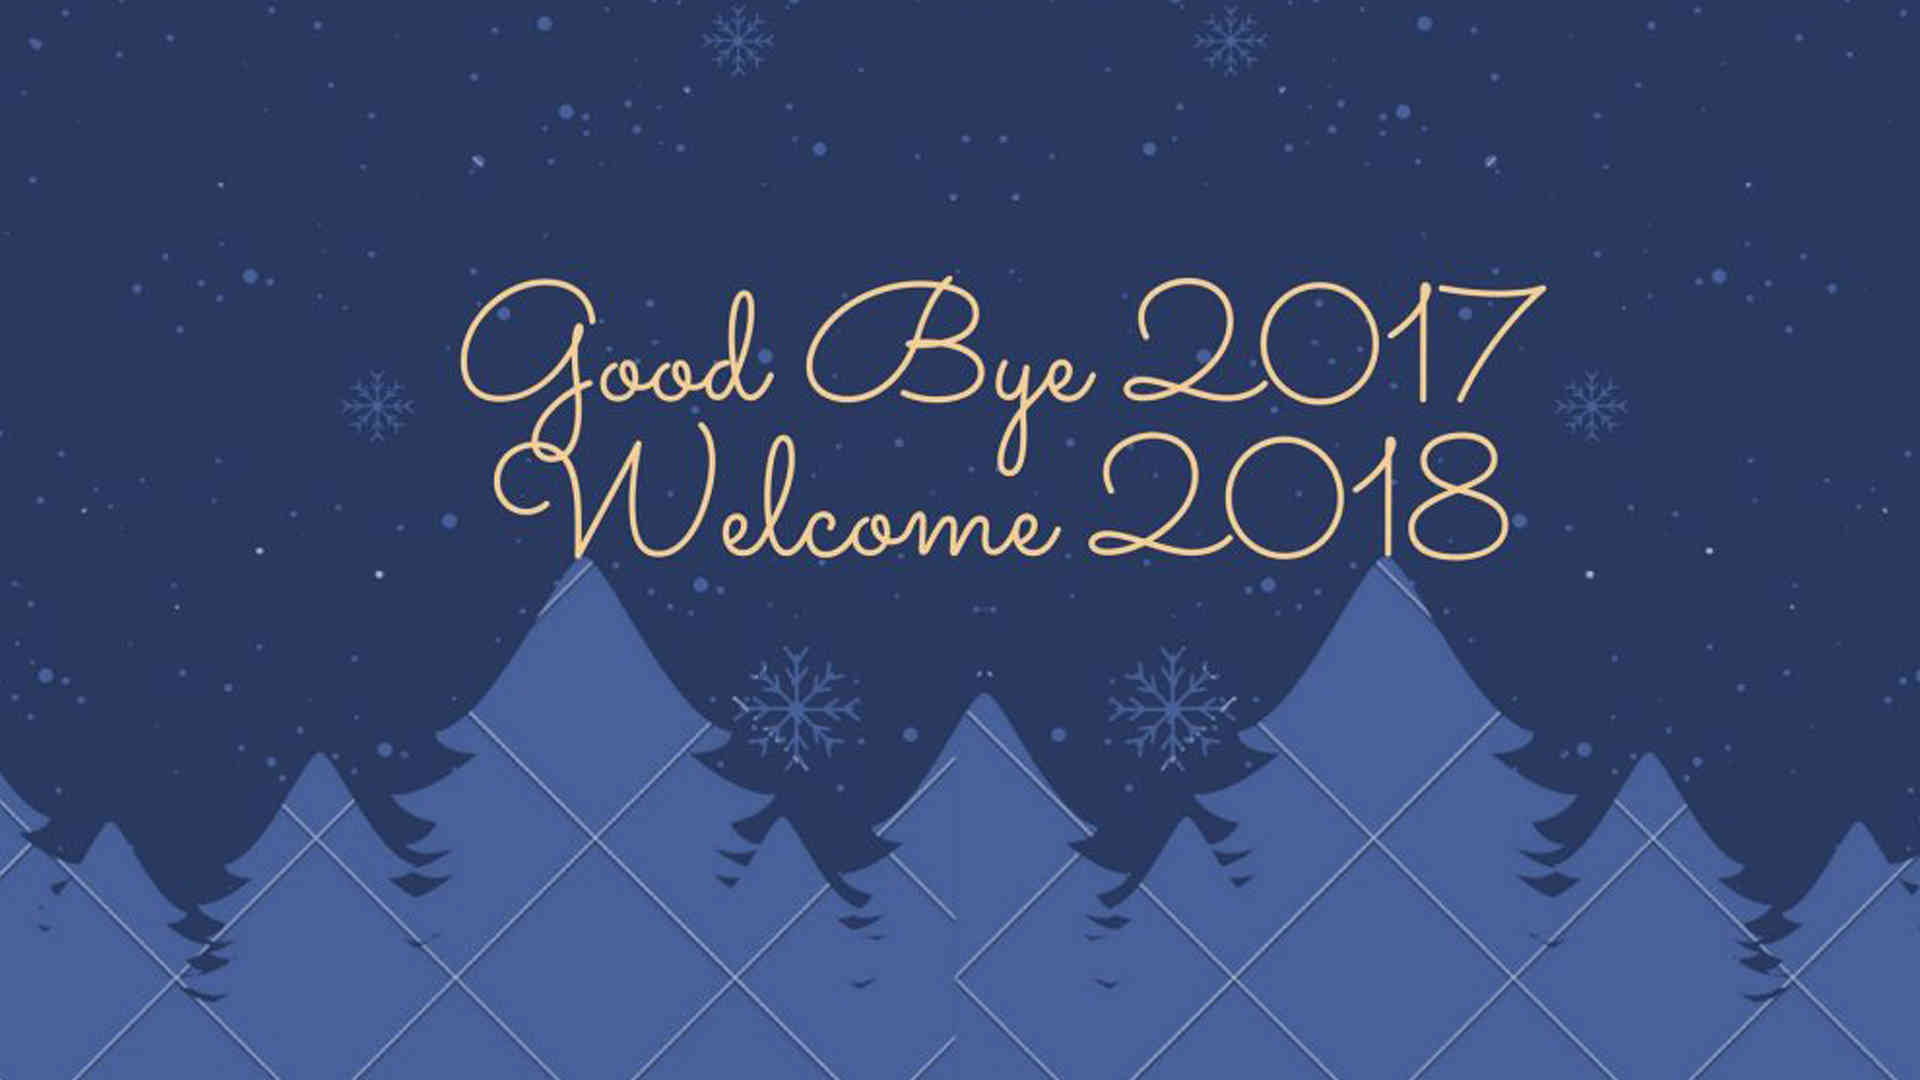 Goodbye 2017 Welcome 2018 New Year Image, SMS & Messages. Happy